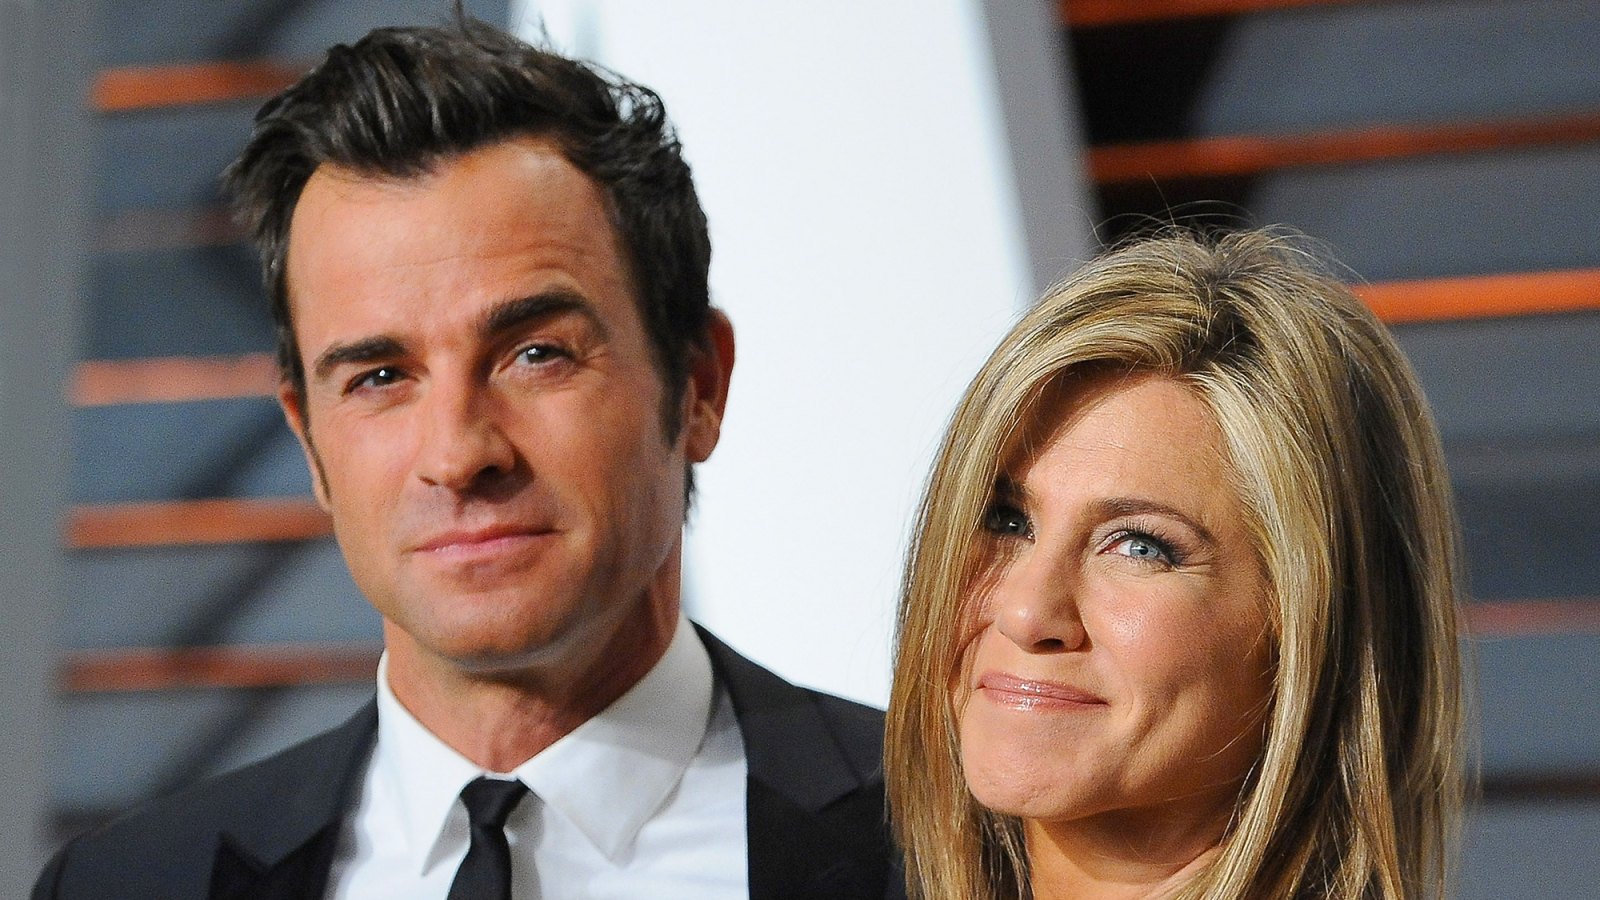 Biggest Celebrity Splits of 2018: Jennifer Aniston and Justin Theroux and More